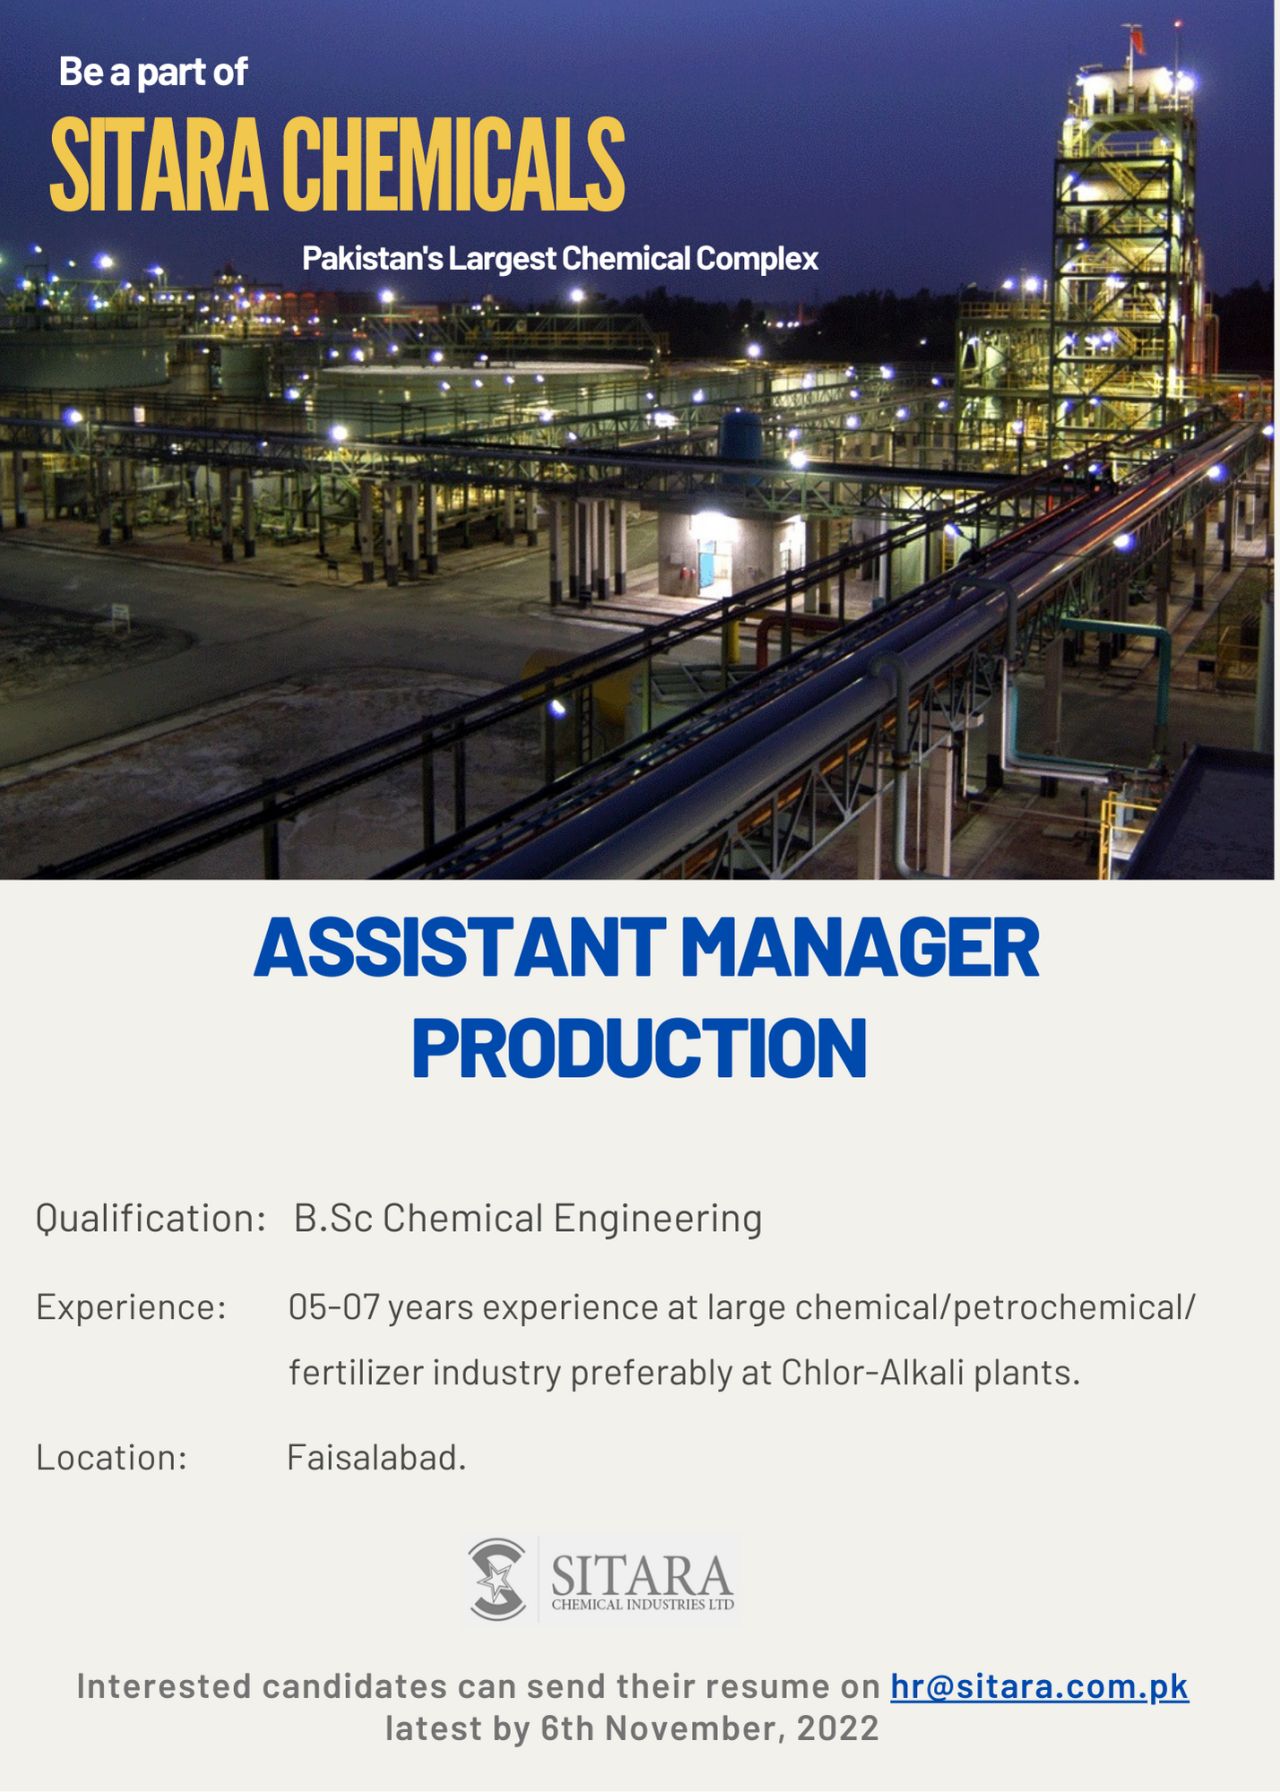 Sitara Chemical Industries Limited Jobs for Assistant Manager Production